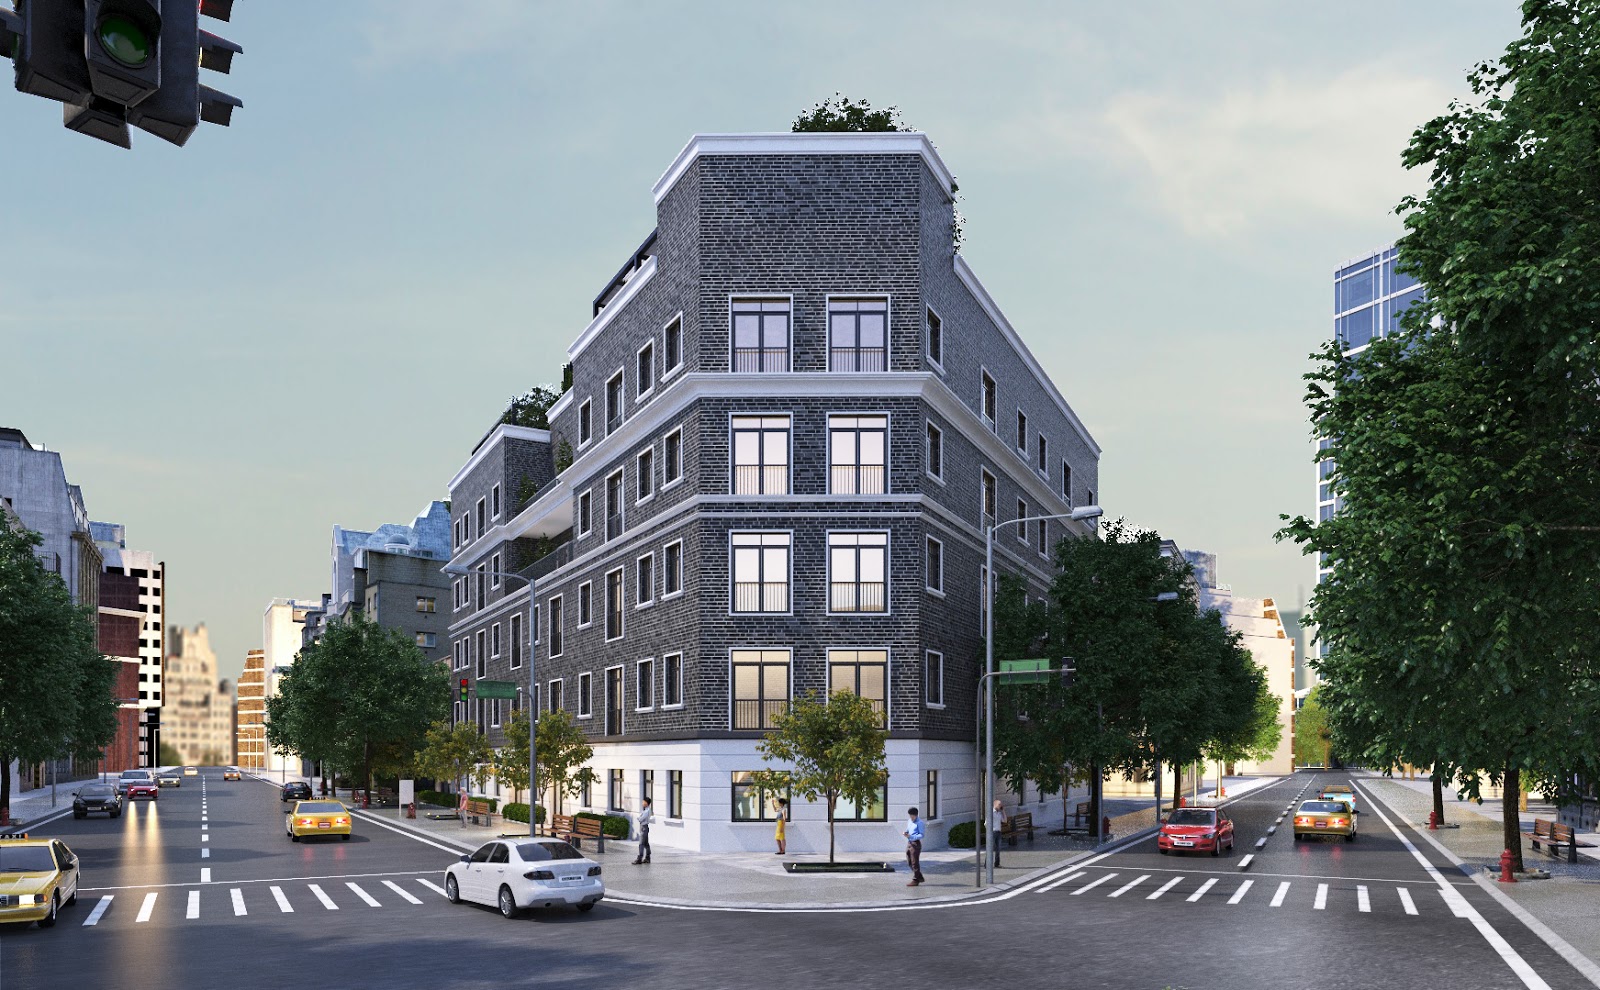 A rendering of an apartment building on a city street.